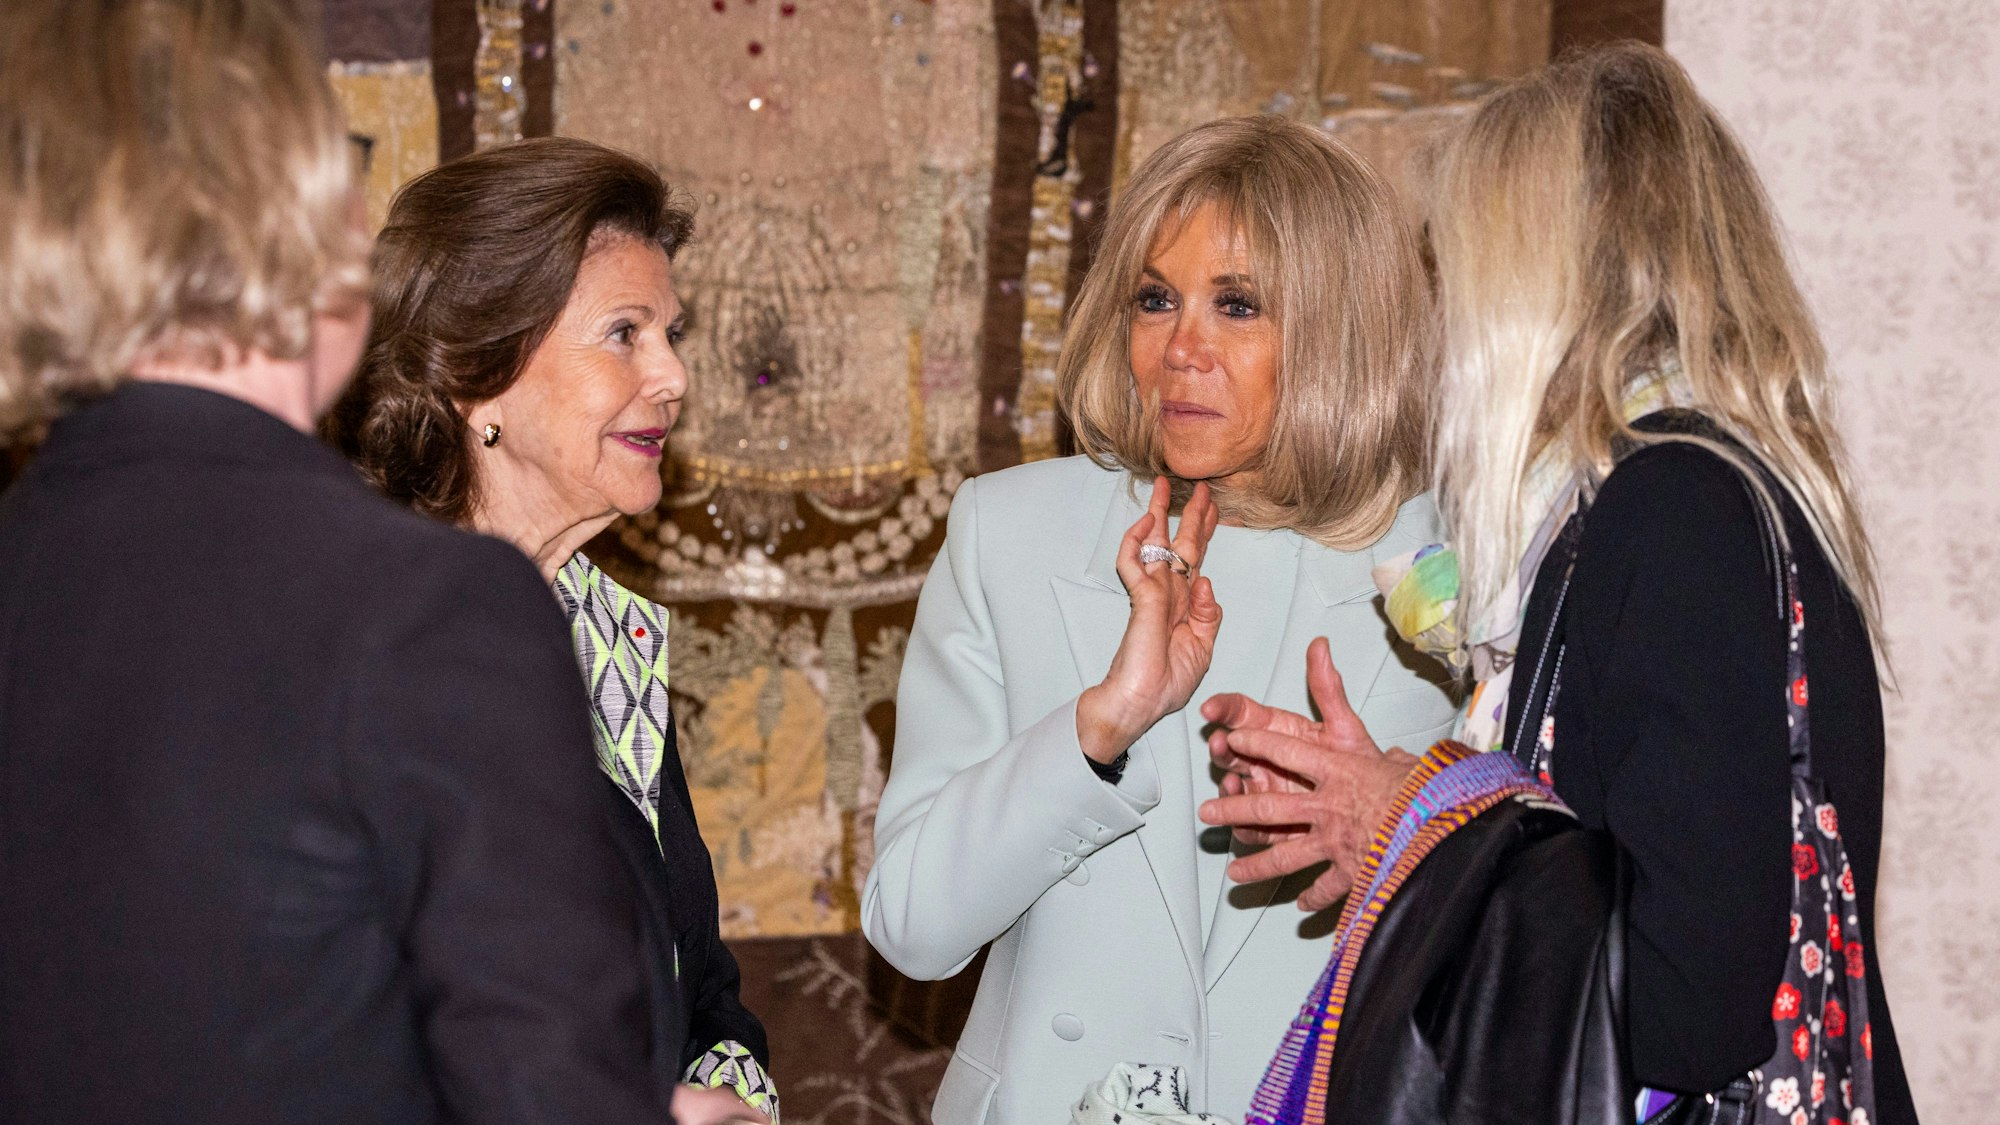 STOCKHOLM, SWEDEN - JANUARY 30: French First Lady Brigitte Macron and Queen Silvia of Sweden visit Moderna Museet, the national museum for modern and contemporary art on January 30, 2024 in Stockholm, Sweden. The French First Lady and President are making a two day visit to Stockholm and Sweden, at the invitation of the King of Sweden. (Photo by Michael Campanella/Getty Images)